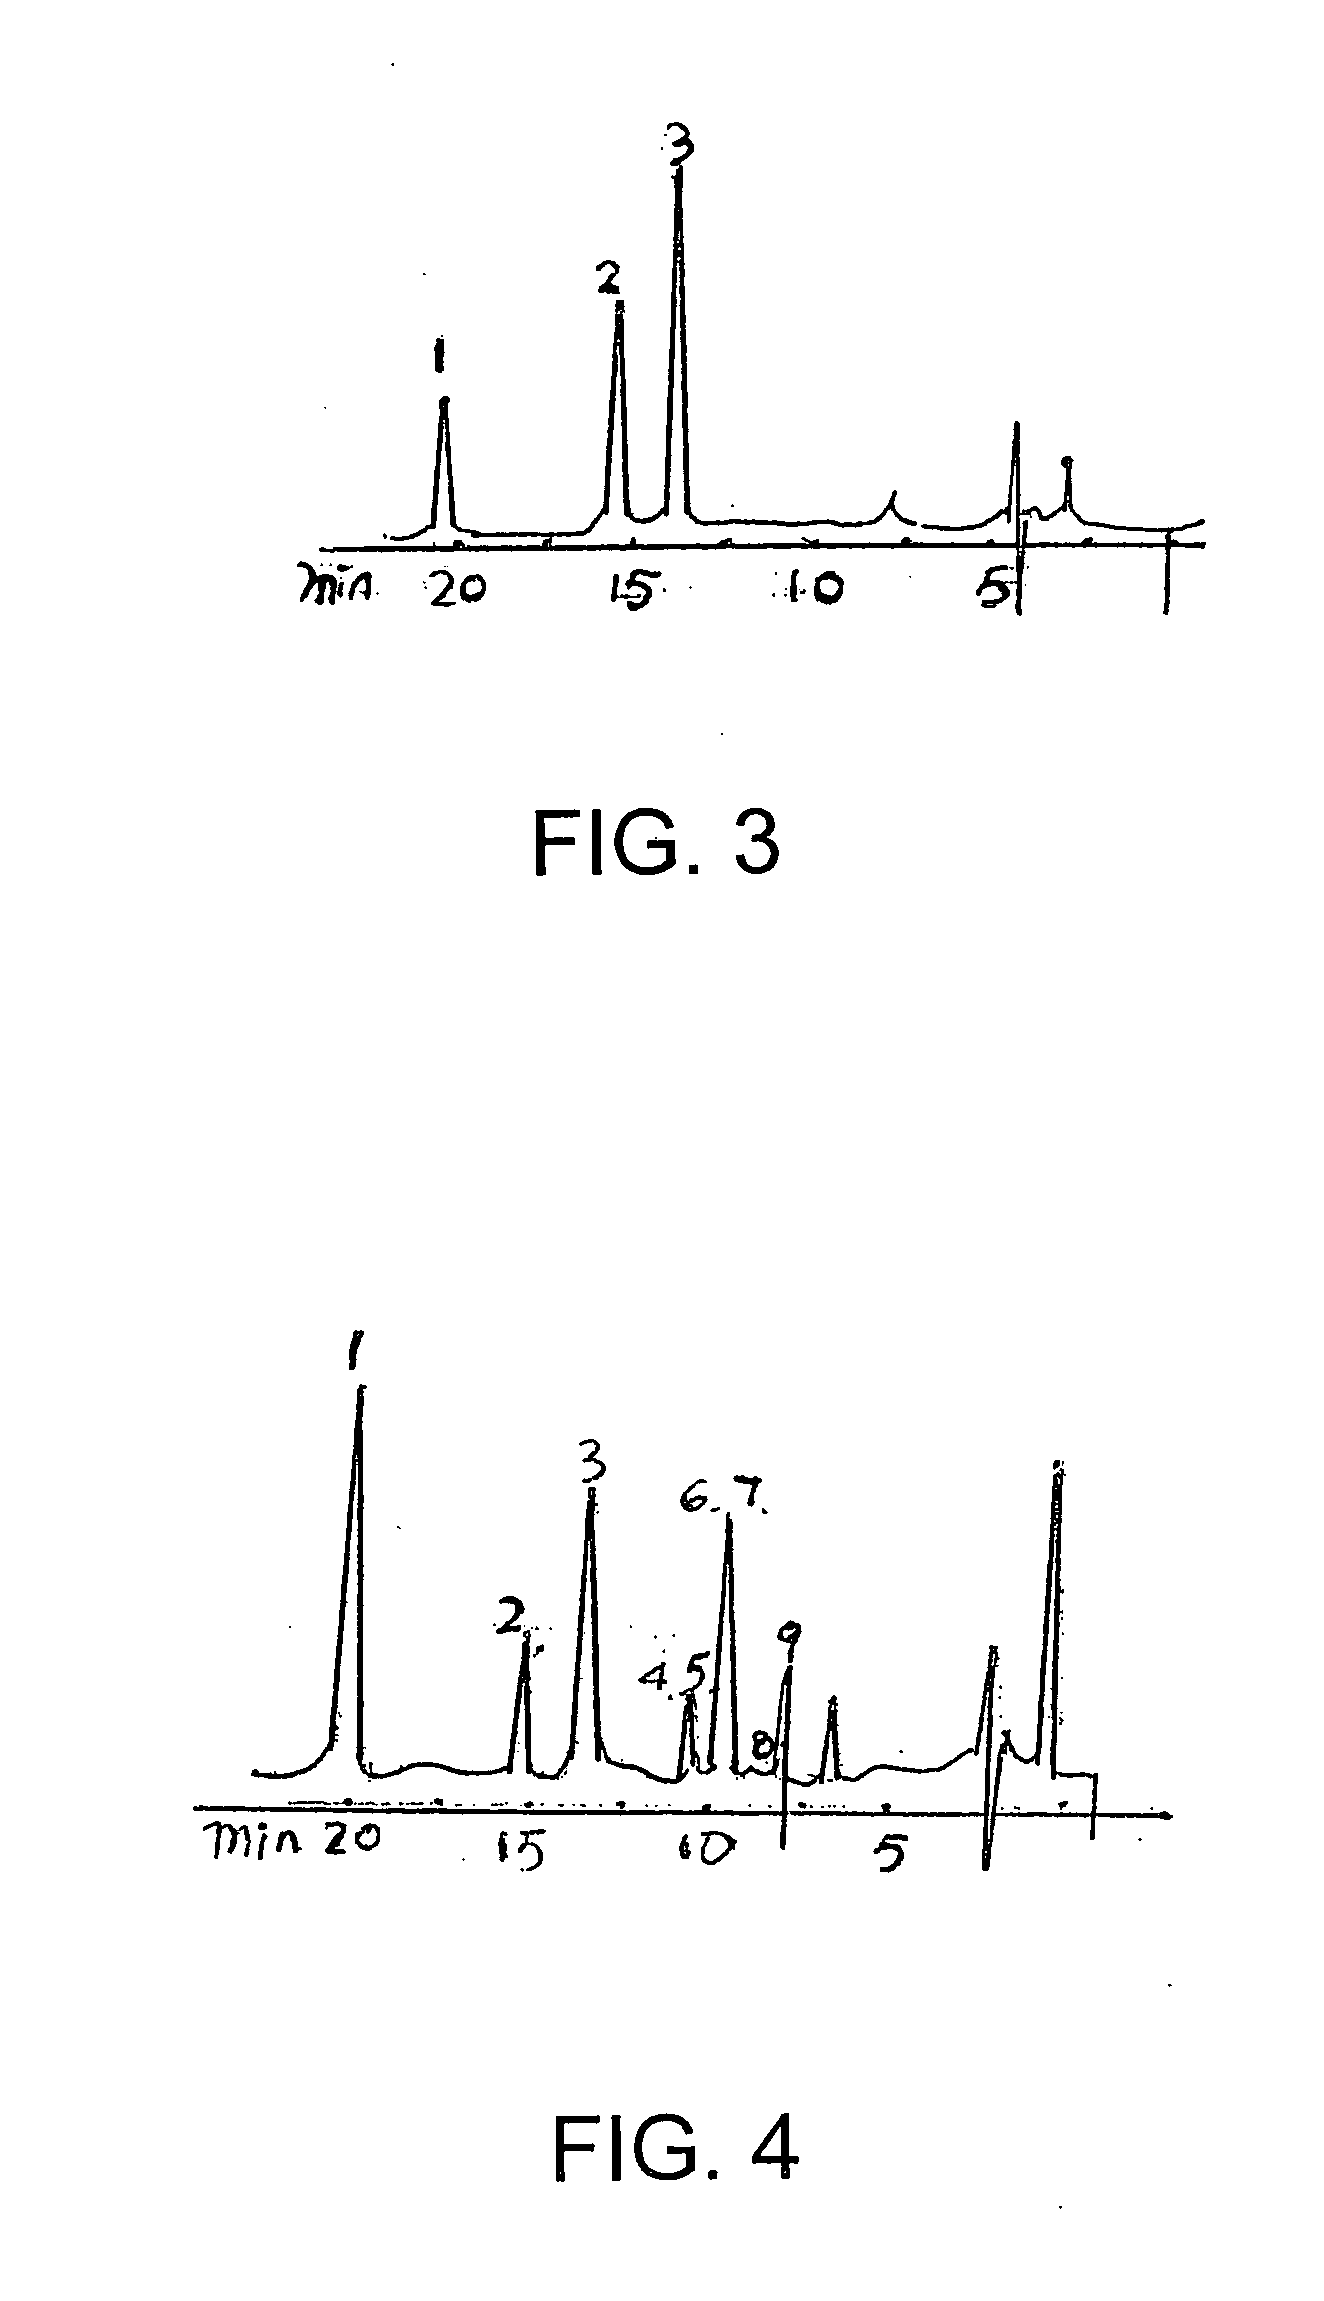 Composition of natural herb extract for treating cardiovascular disease and its method of preparation thereof